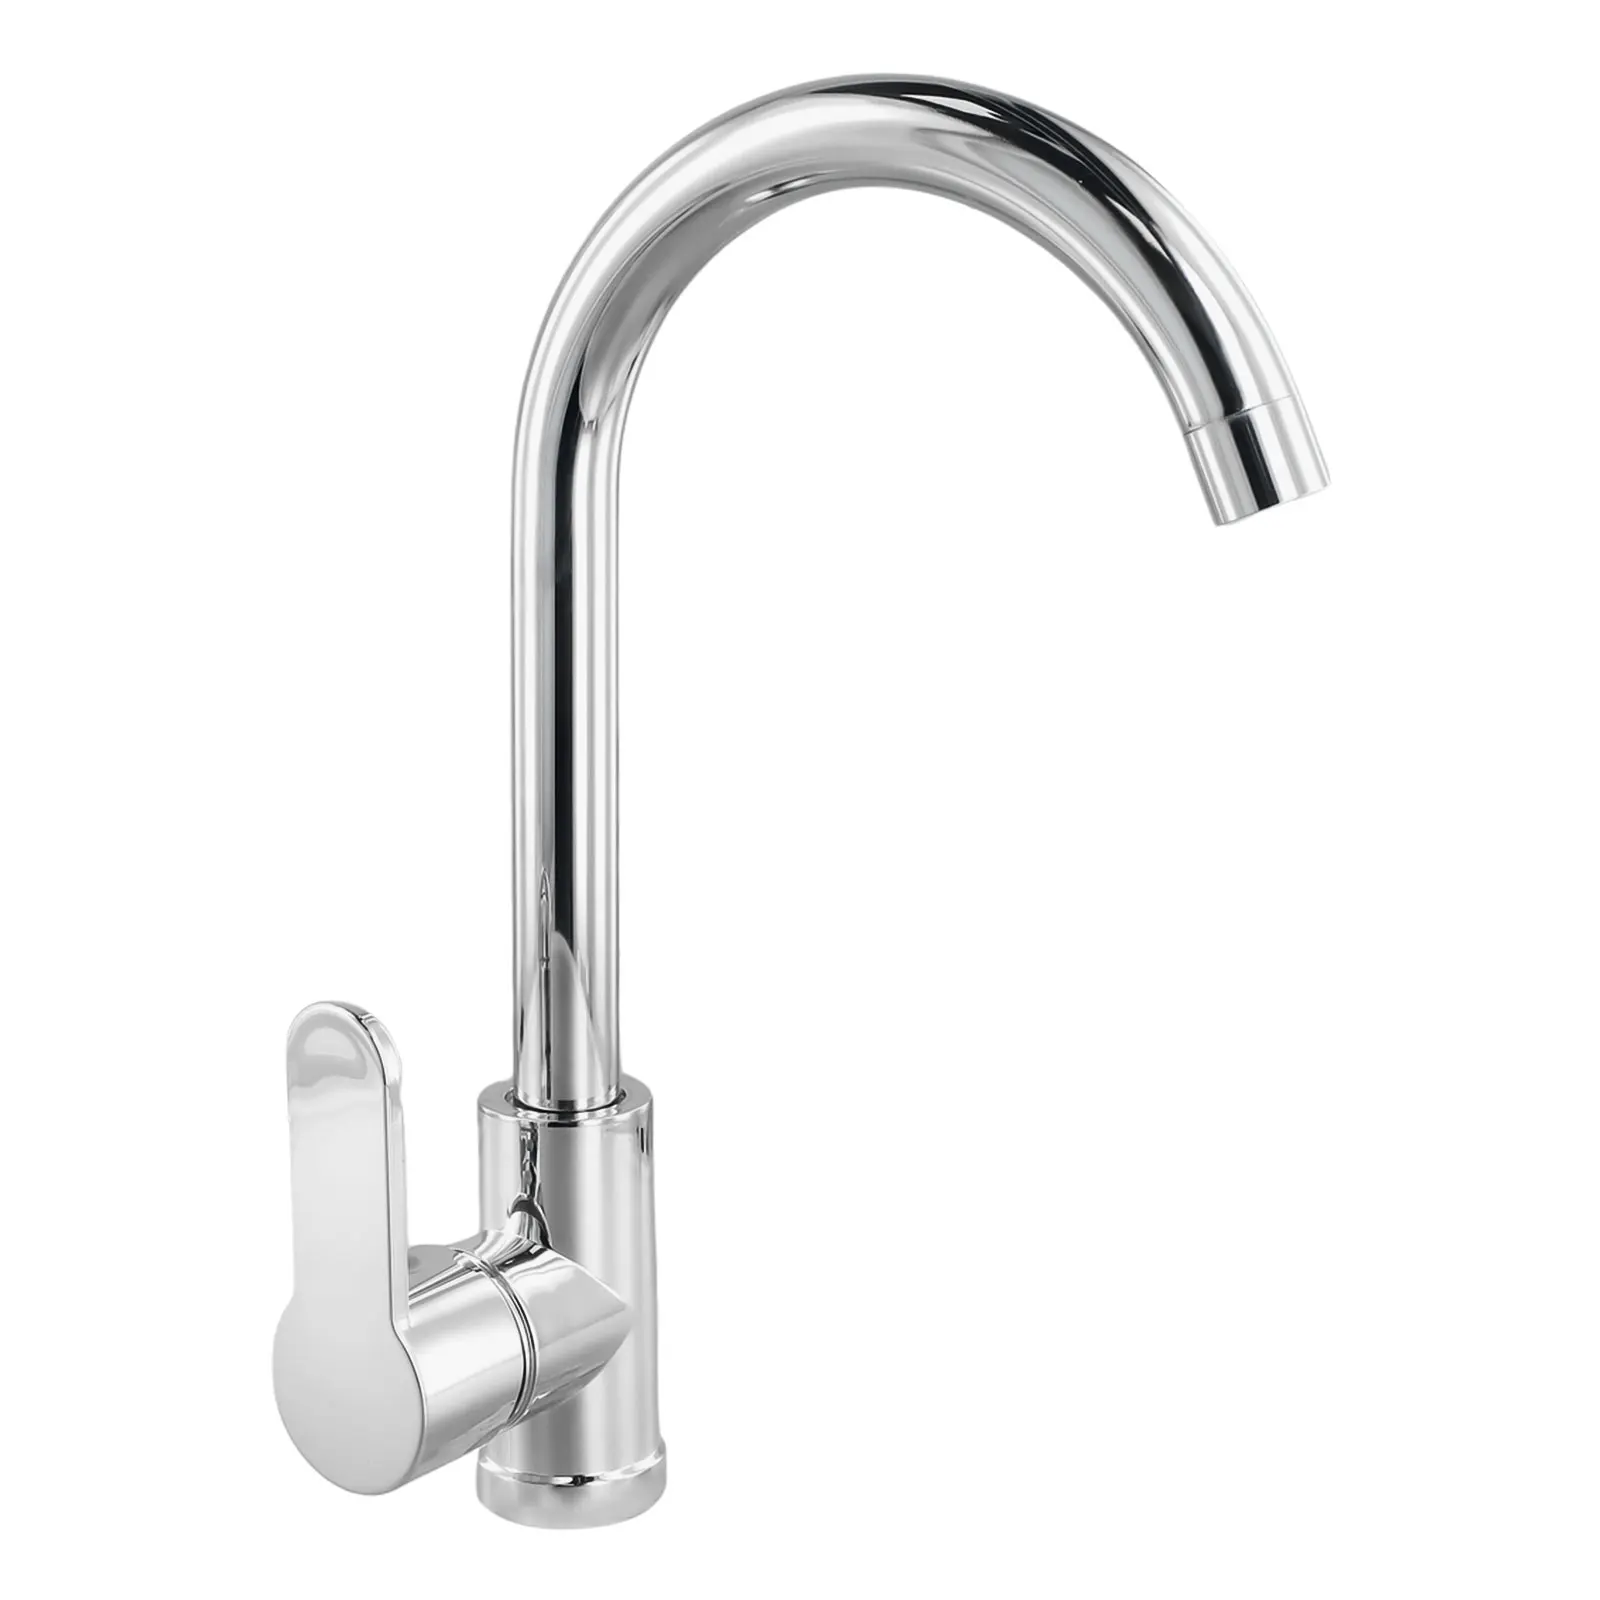 Stainless Steel Kitchen Faucet Polished Chrome Plated Swivel Basin Sink Cold Hot Easy To Operate Mixer Tap madica basin faucet mixer chrome bathroom basin mixer tap bathroom taps torneira para banheiro wash basin sink faucet brass tap